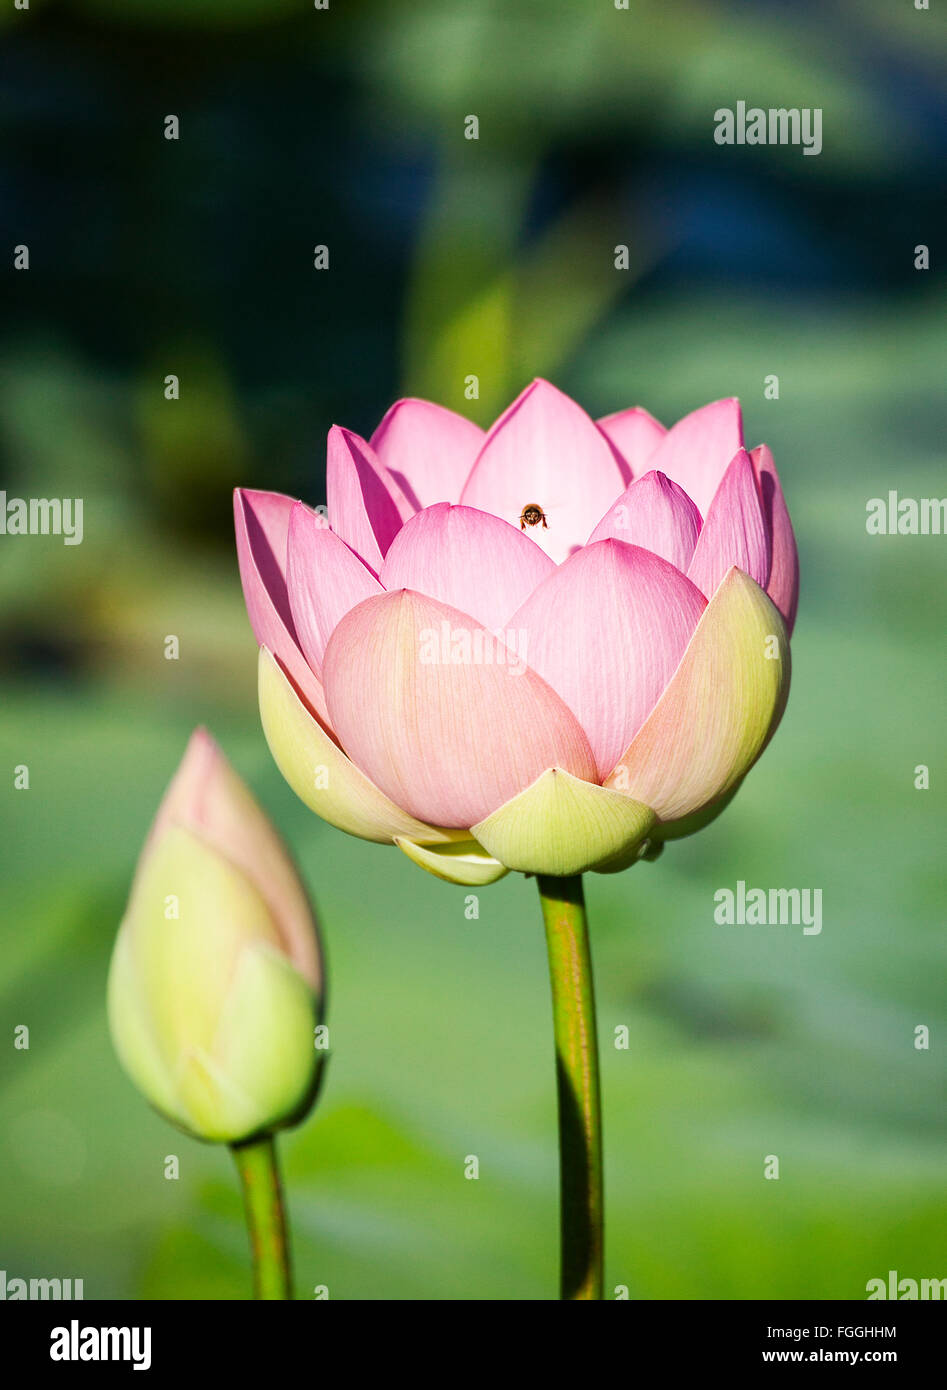 A small bee is hovering over a pink lily pad (lotus) blossom in a pond. Stock Photo